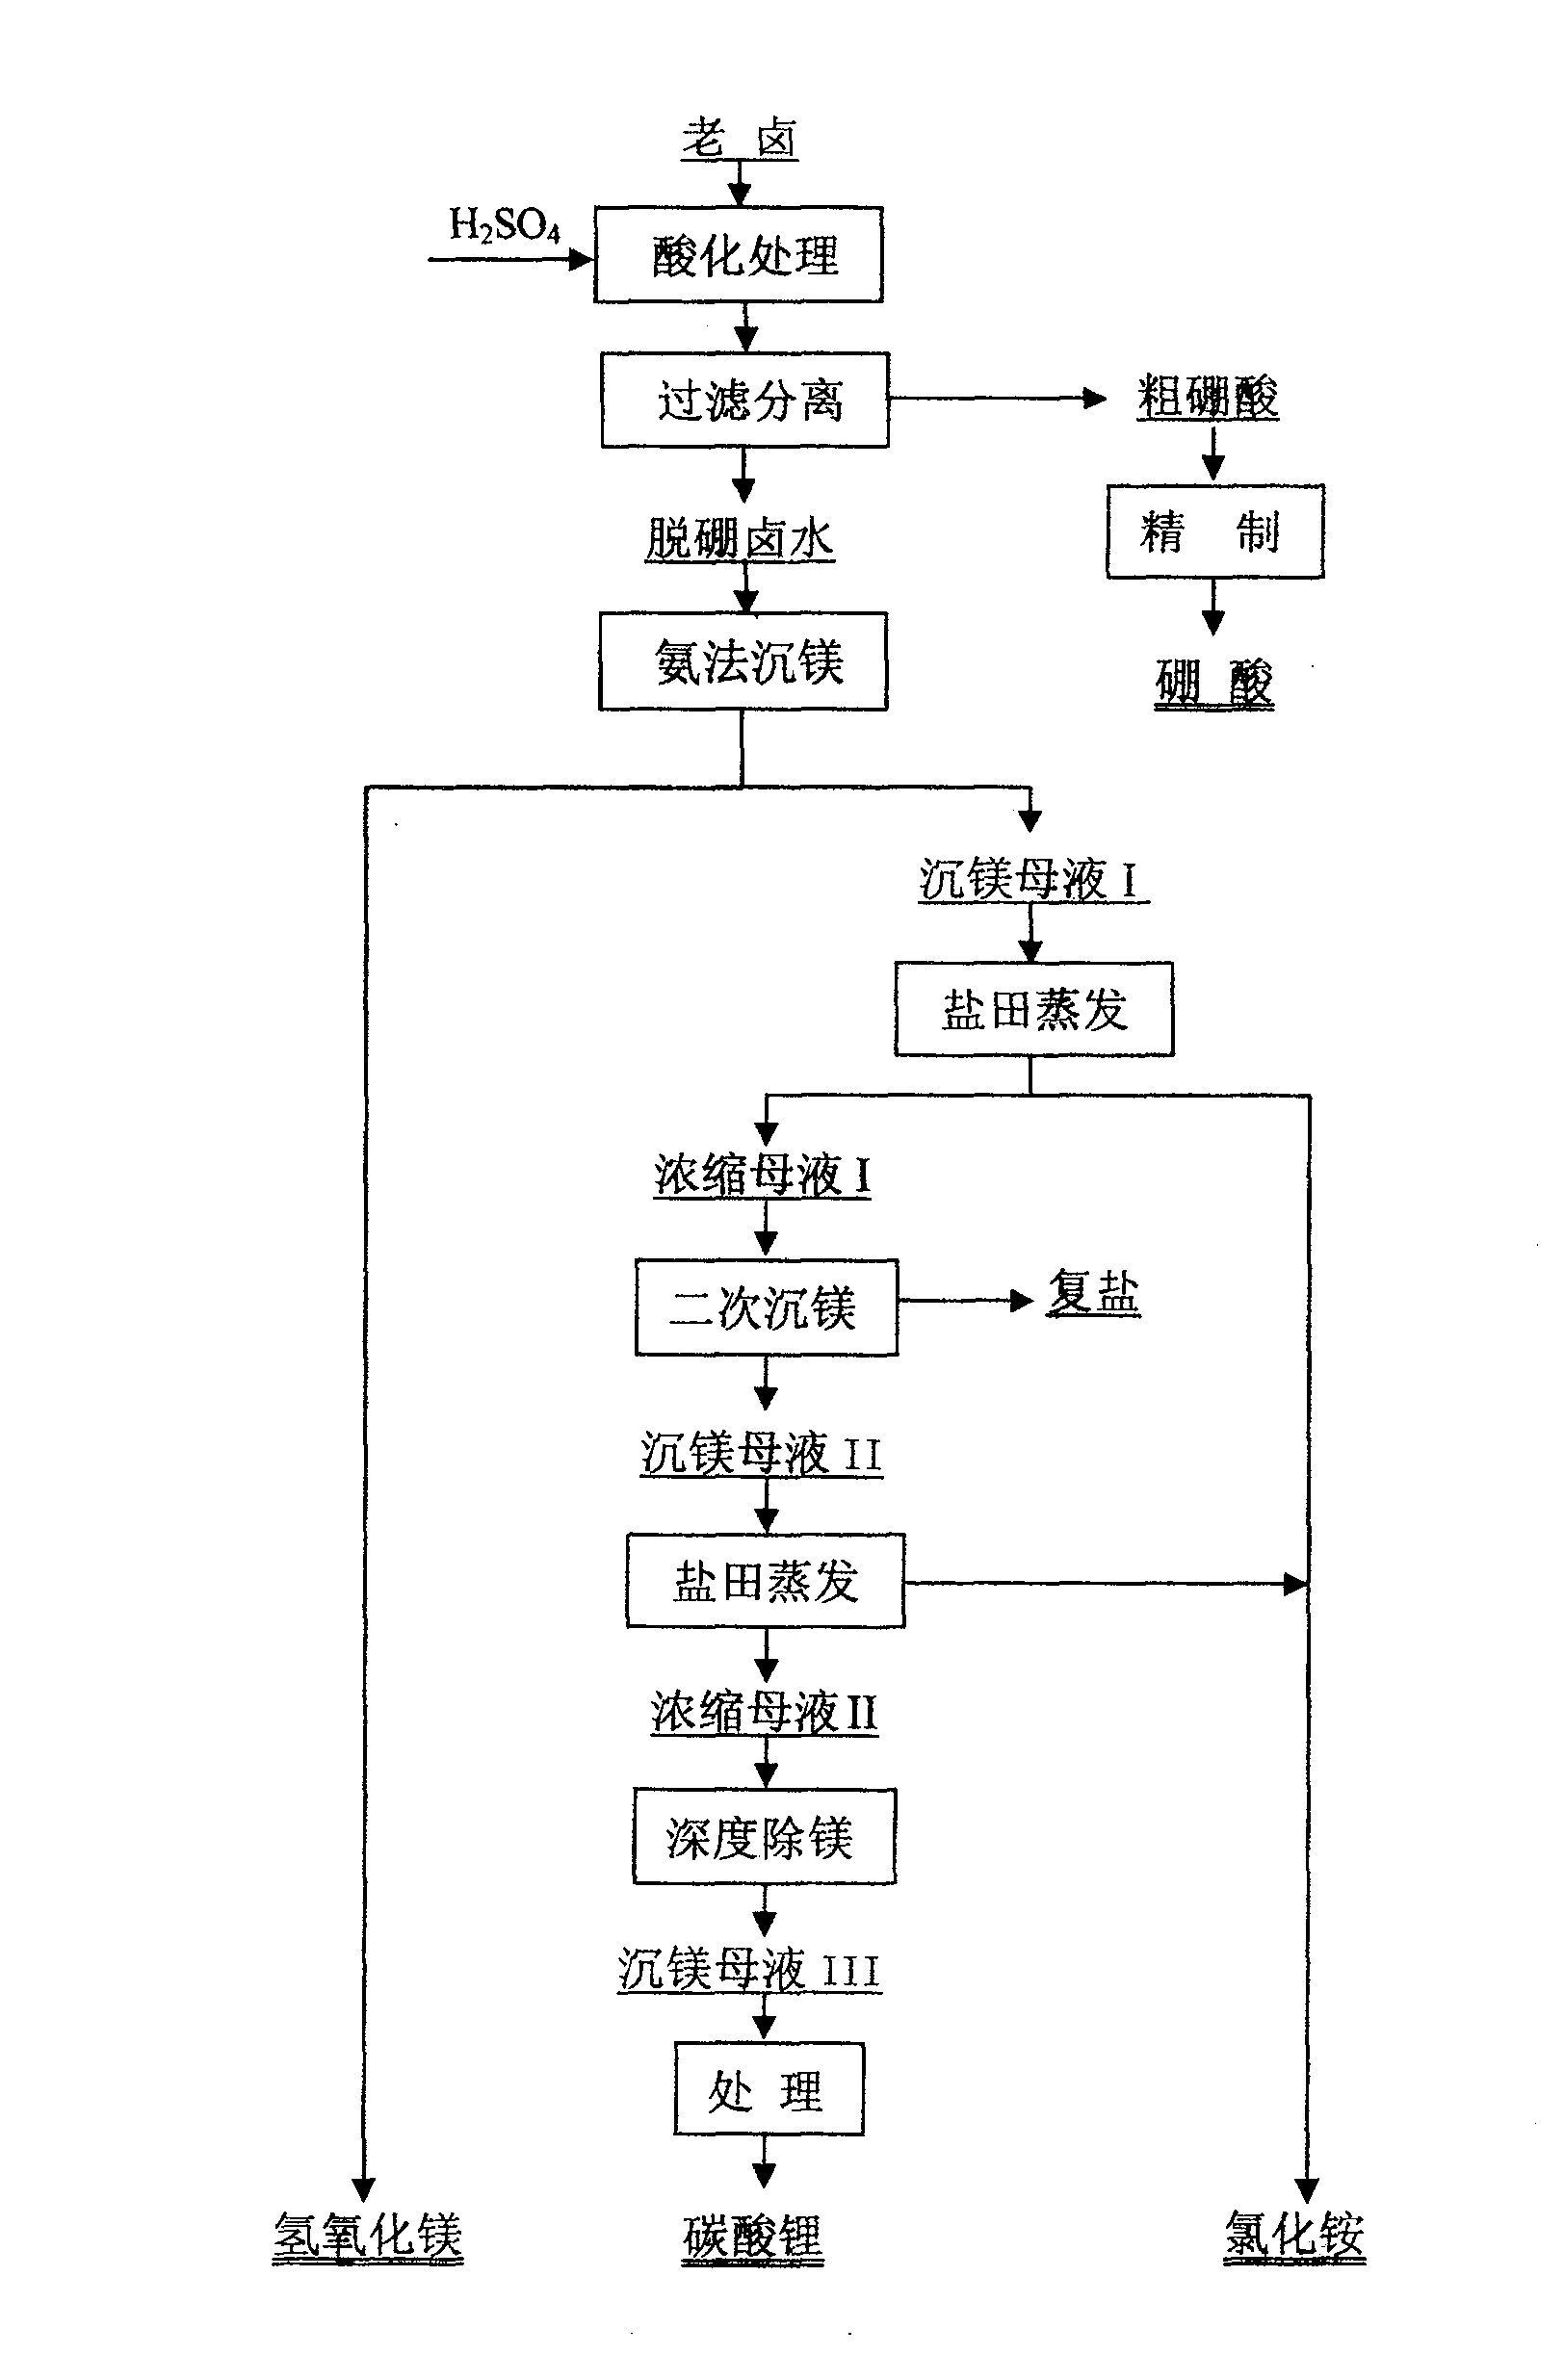 Method for combined extracting boron, magnesium and lithium from salt lake bittern